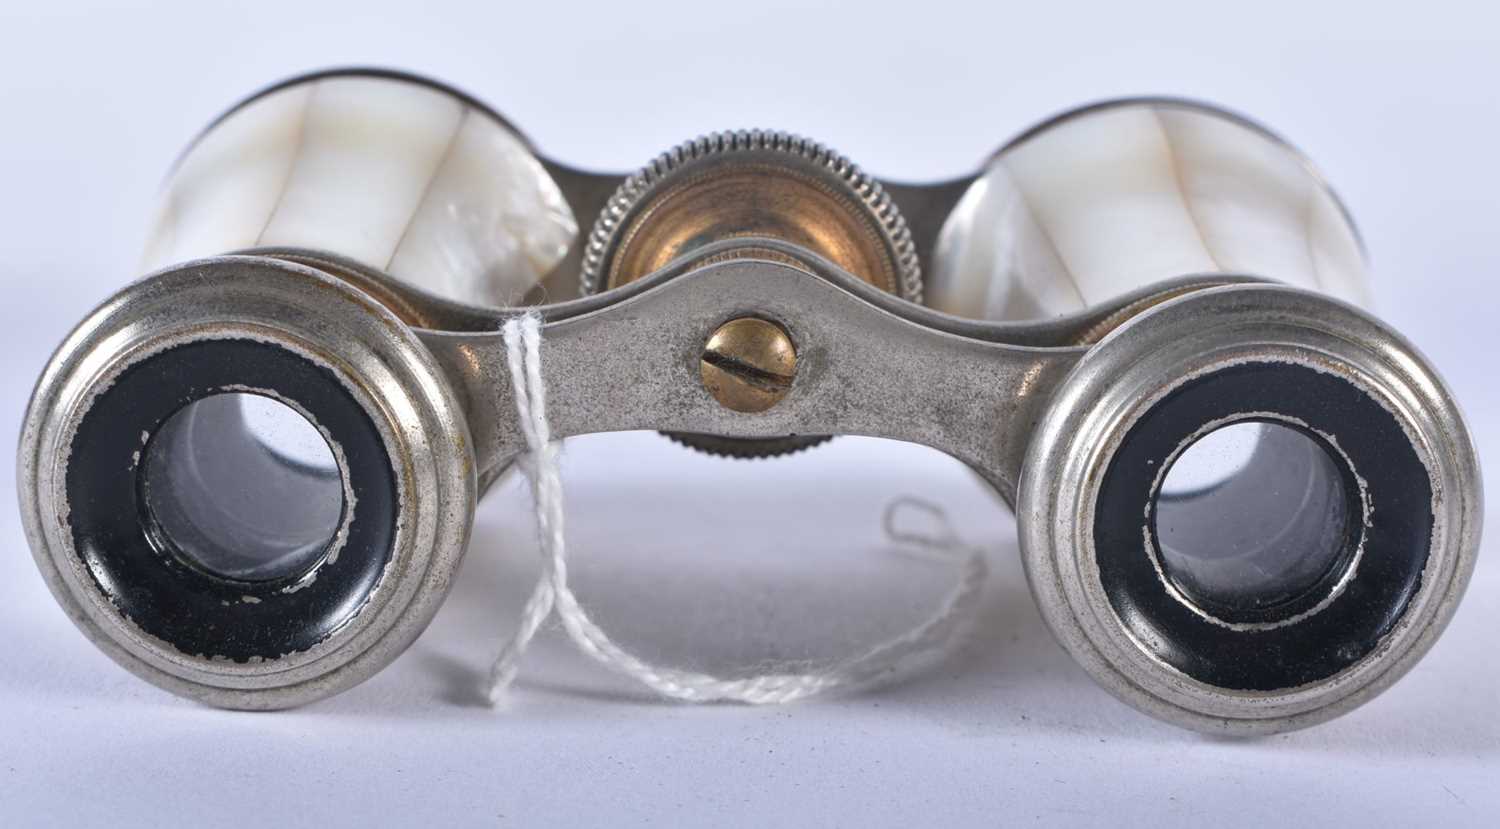 A PAIR OF MOTHER OF PEARL OPERA GLASSES. 9 cm x 9 cm extended. - Image 5 of 5